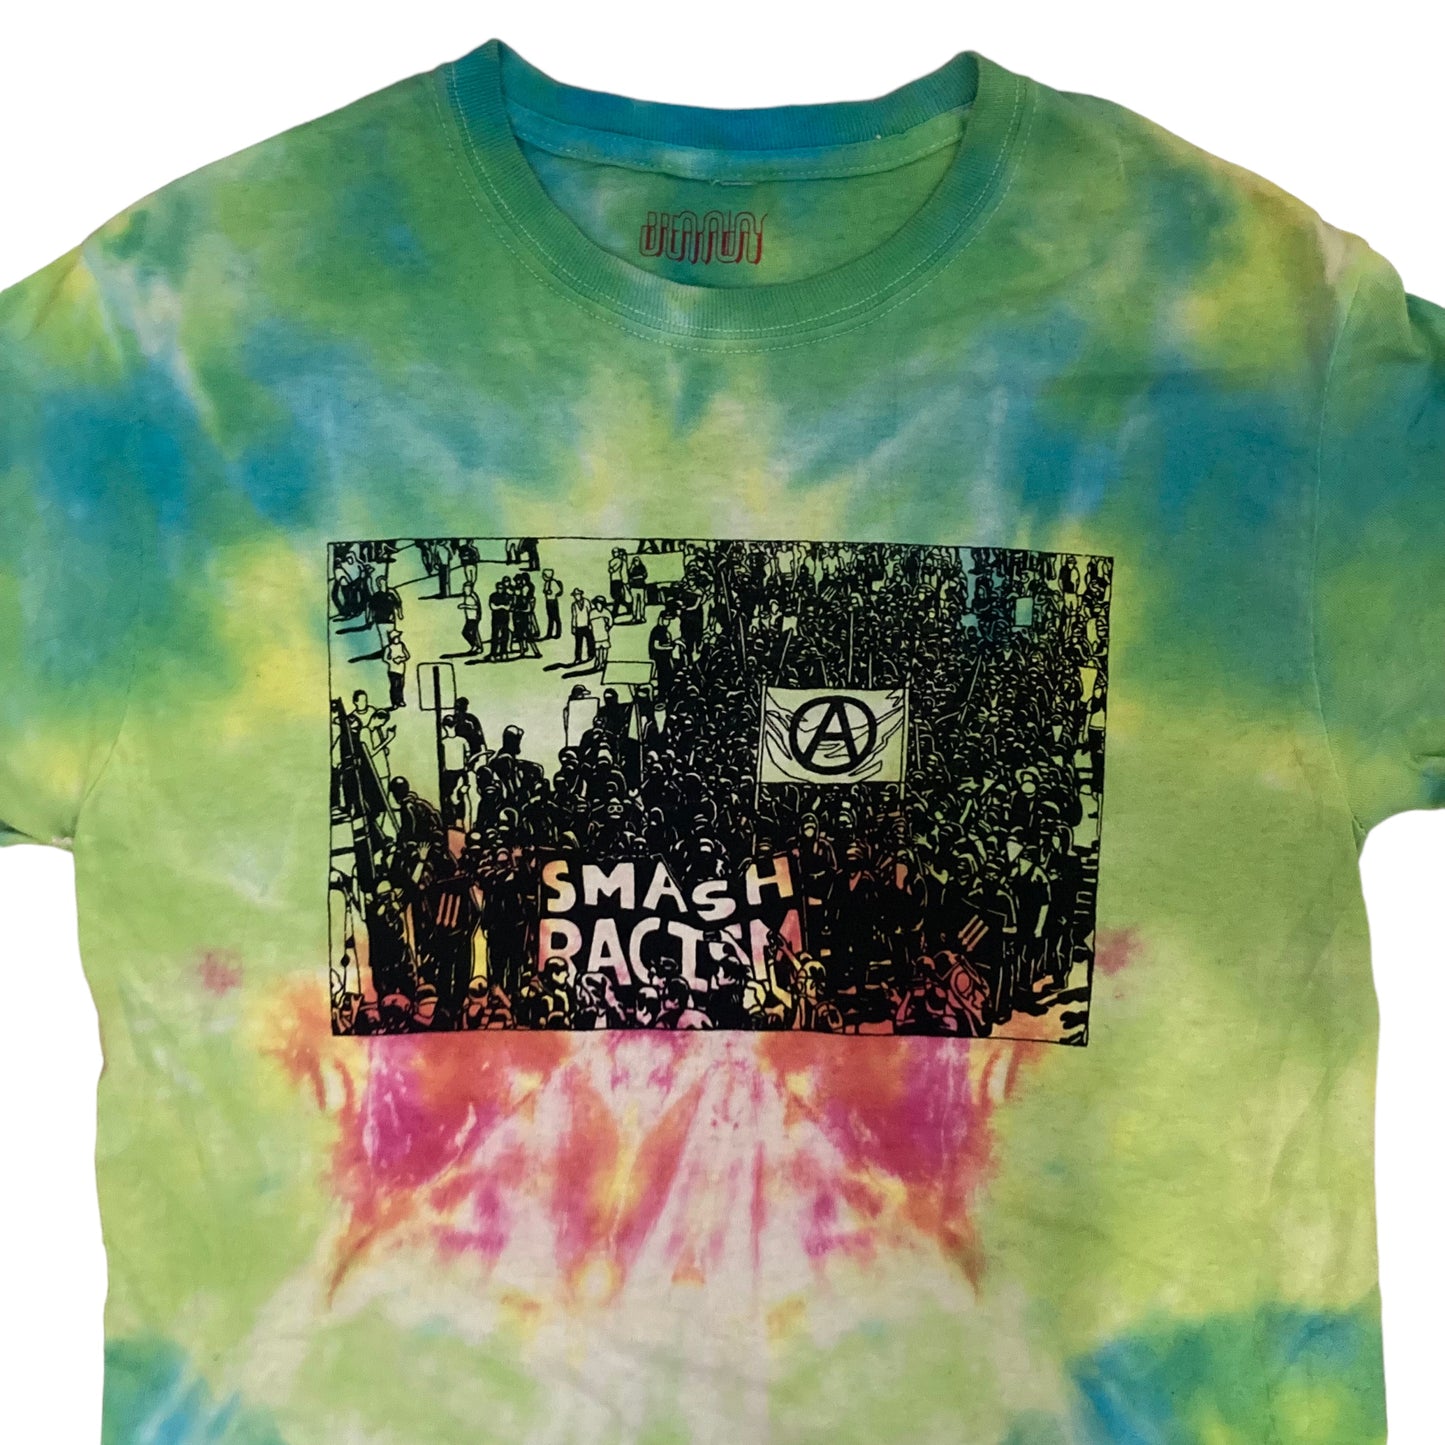 Smash Racism Shirt - One of a Kind - Tie Dye (Small)